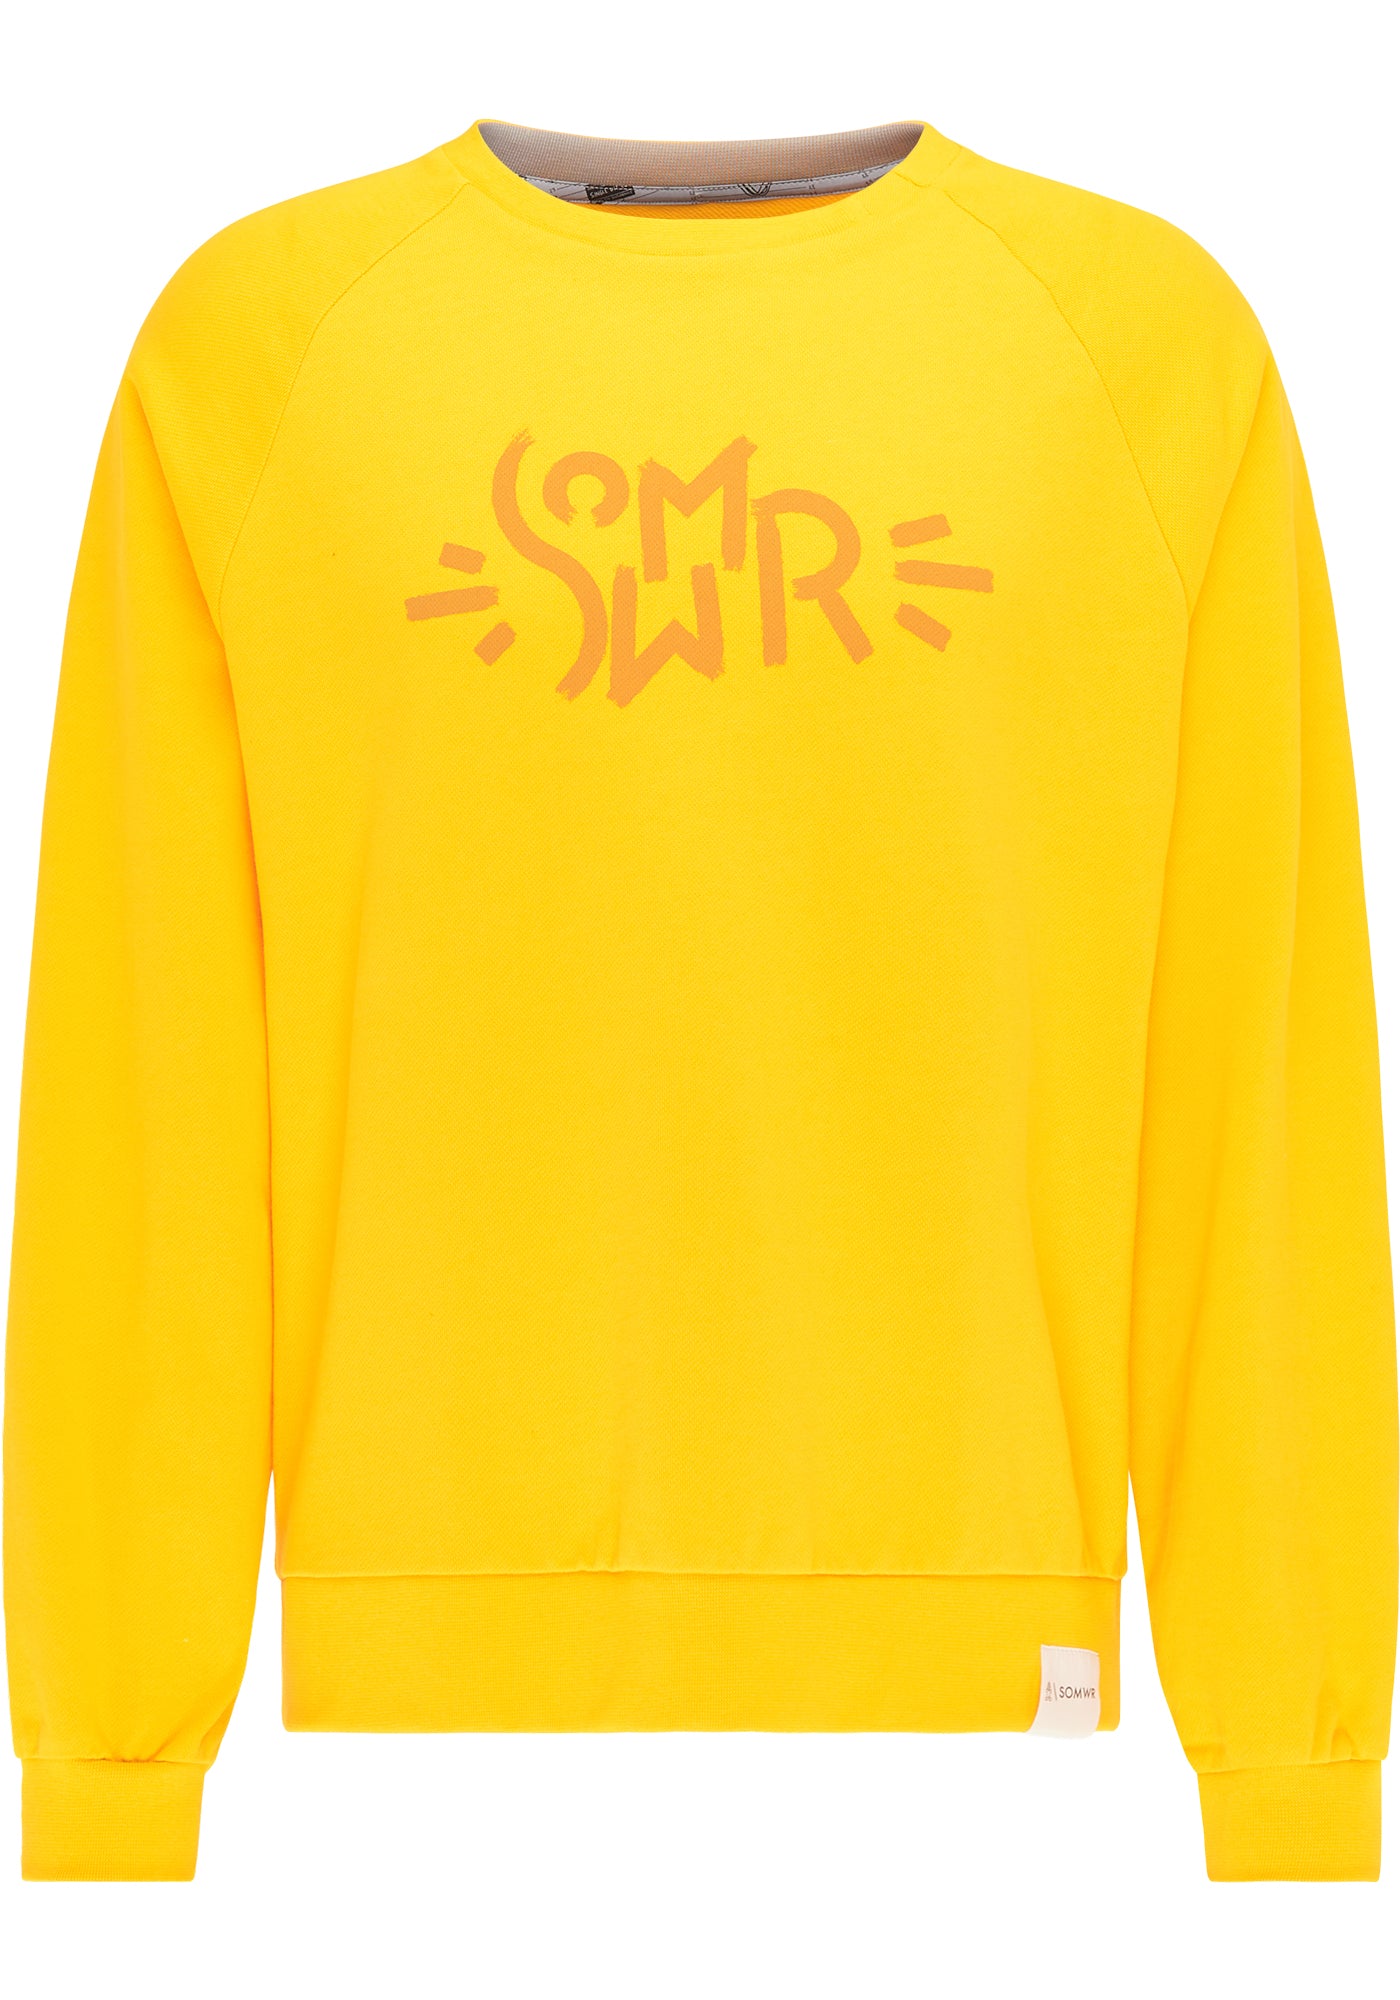 SOMWR SMILEY SWEATER Sweater YEL008